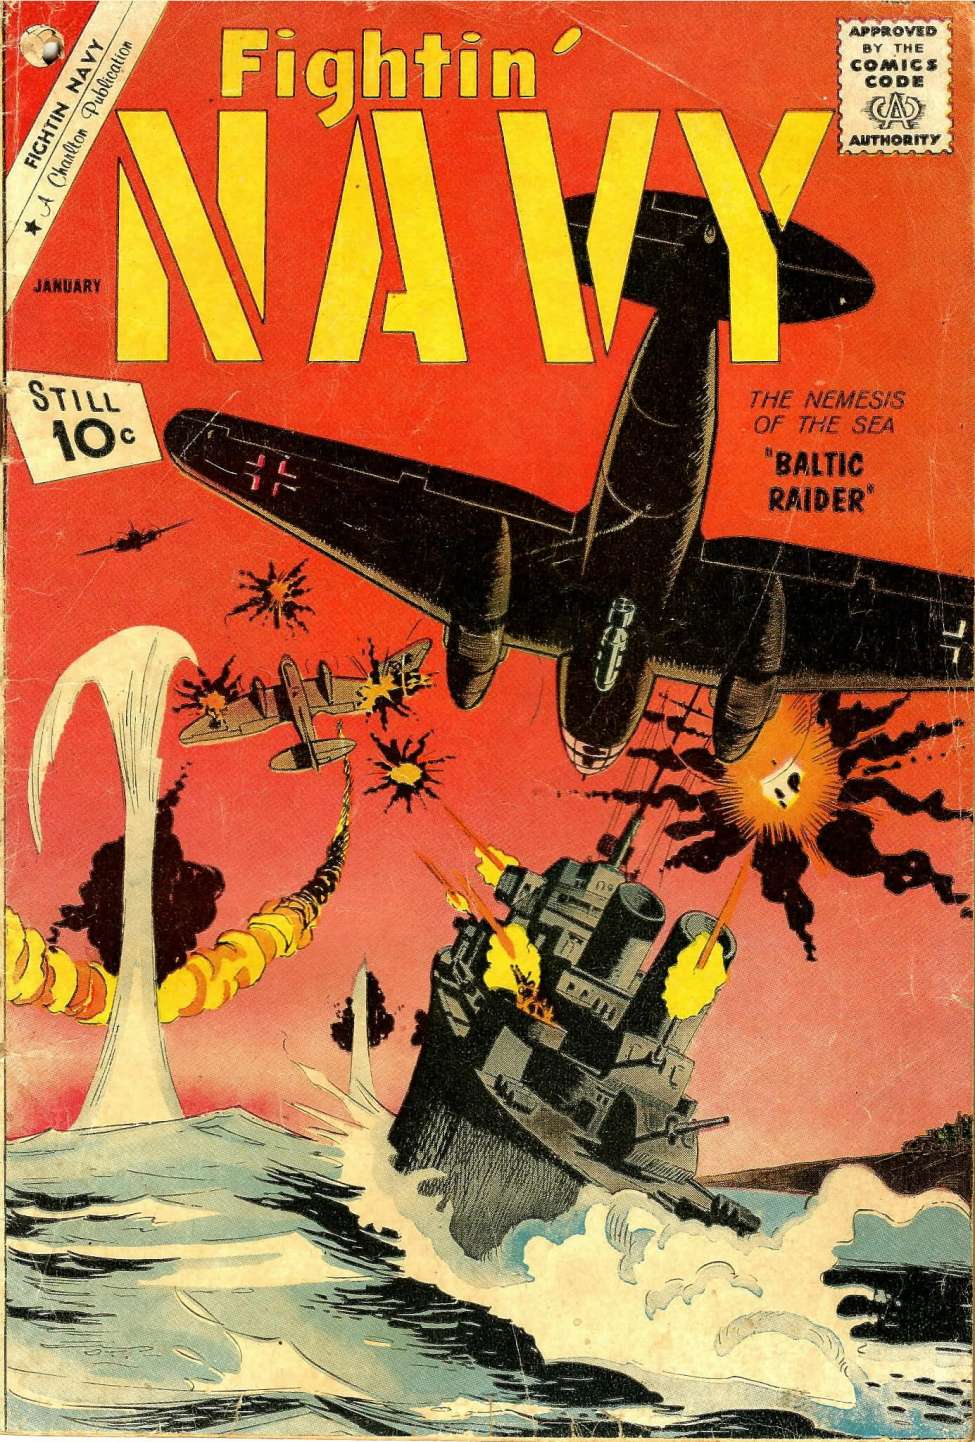 Book Cover For Fightin' Navy 102